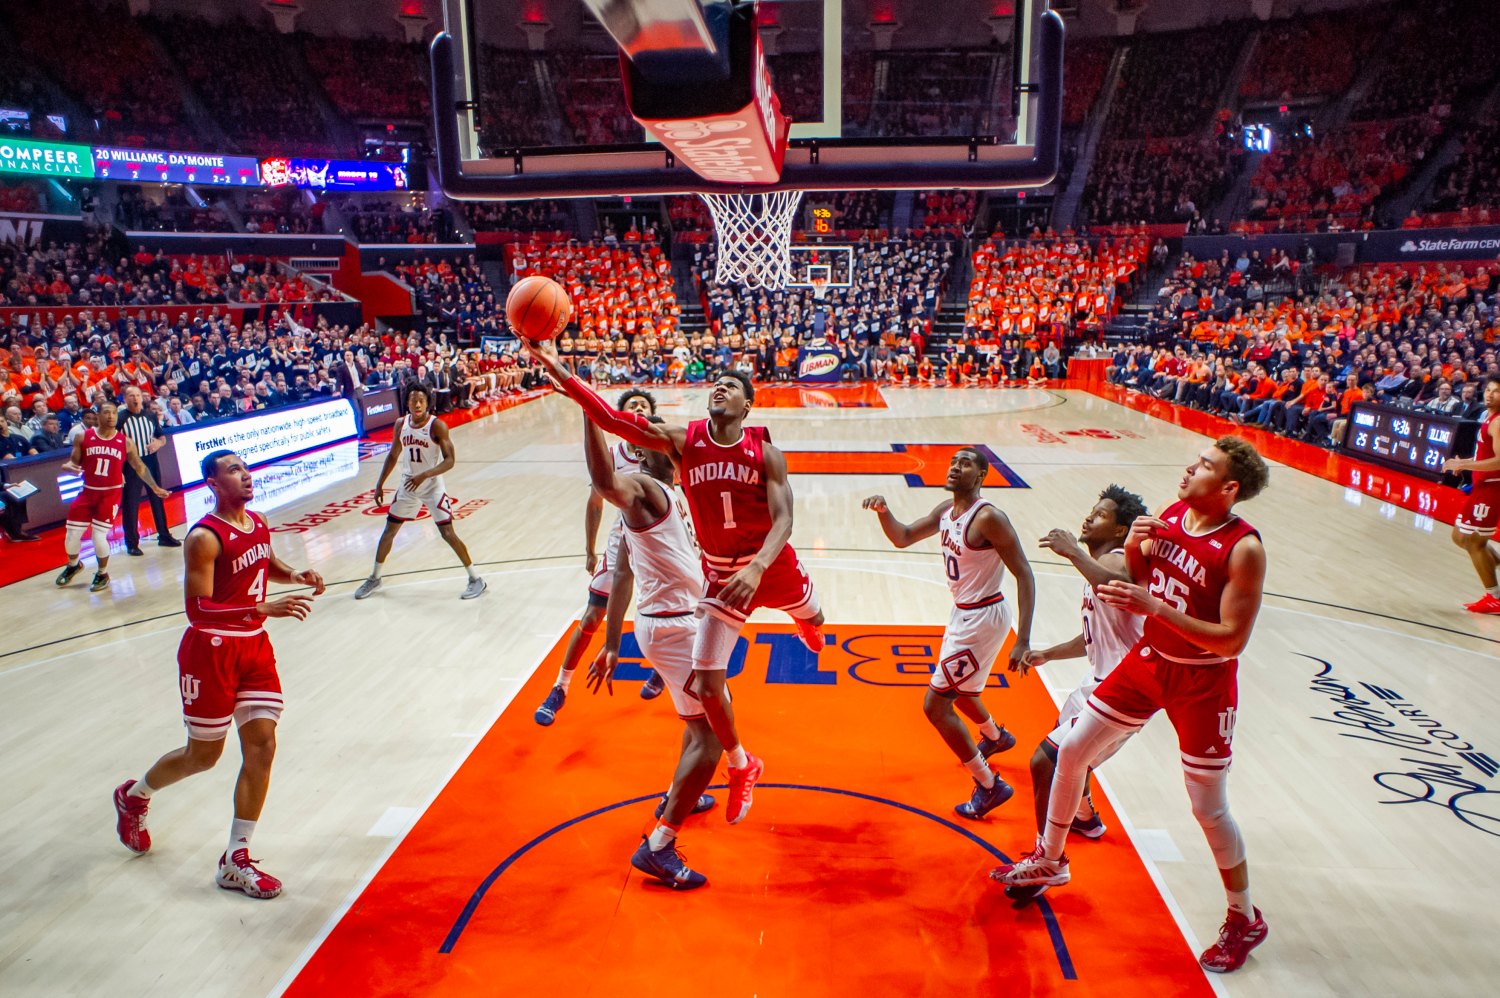 Mar 1, 2020; Champaign, Illinois, USA; Indiana Hoosiers guard Al Durham (1) shoots against the Illinois Fighting Illini during the first half at State Farm Center. Mandatory Credit: Patrick Gorski-USA TODAY Sports